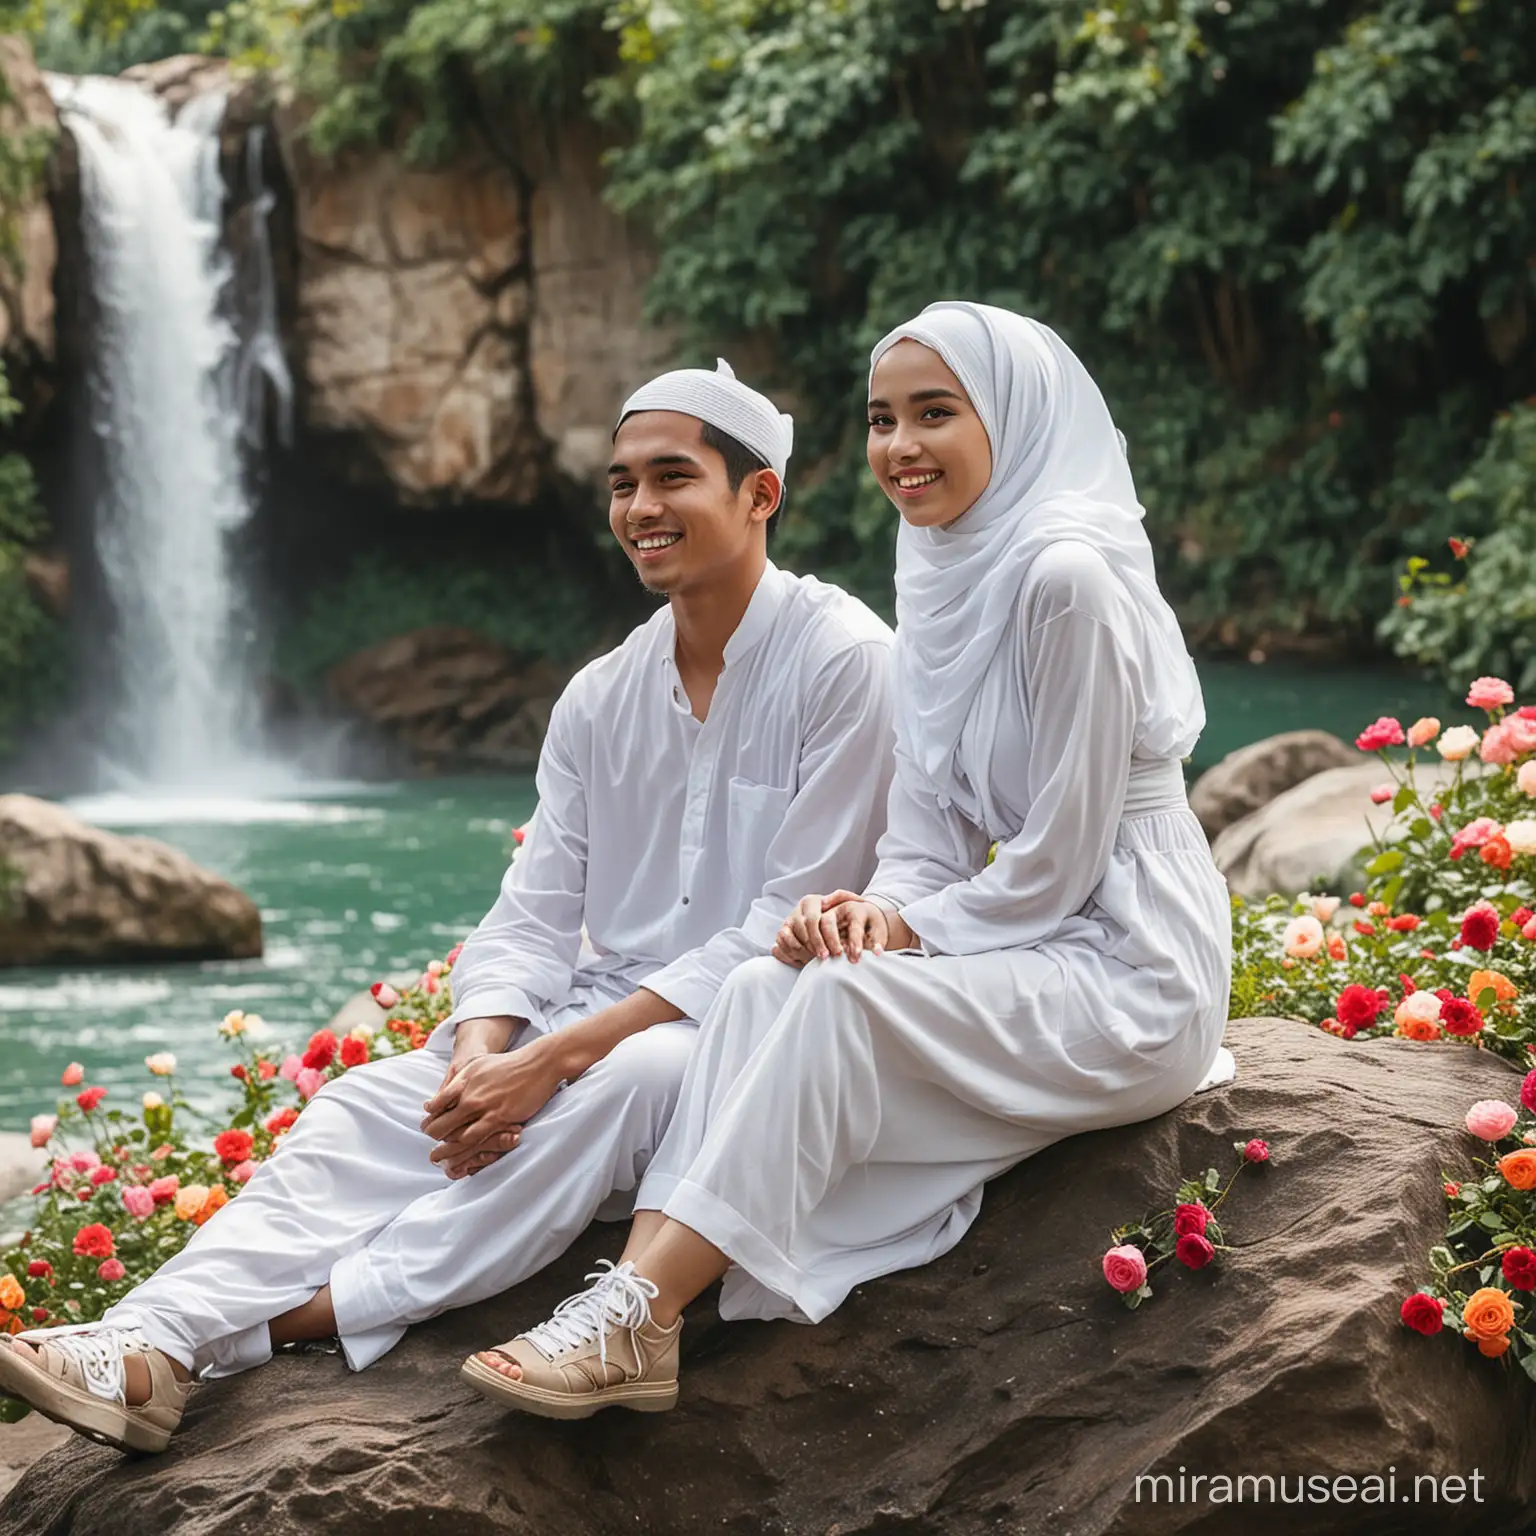 Indonesian Couple Enjoying Waterfall Scenery with Colorful Roses